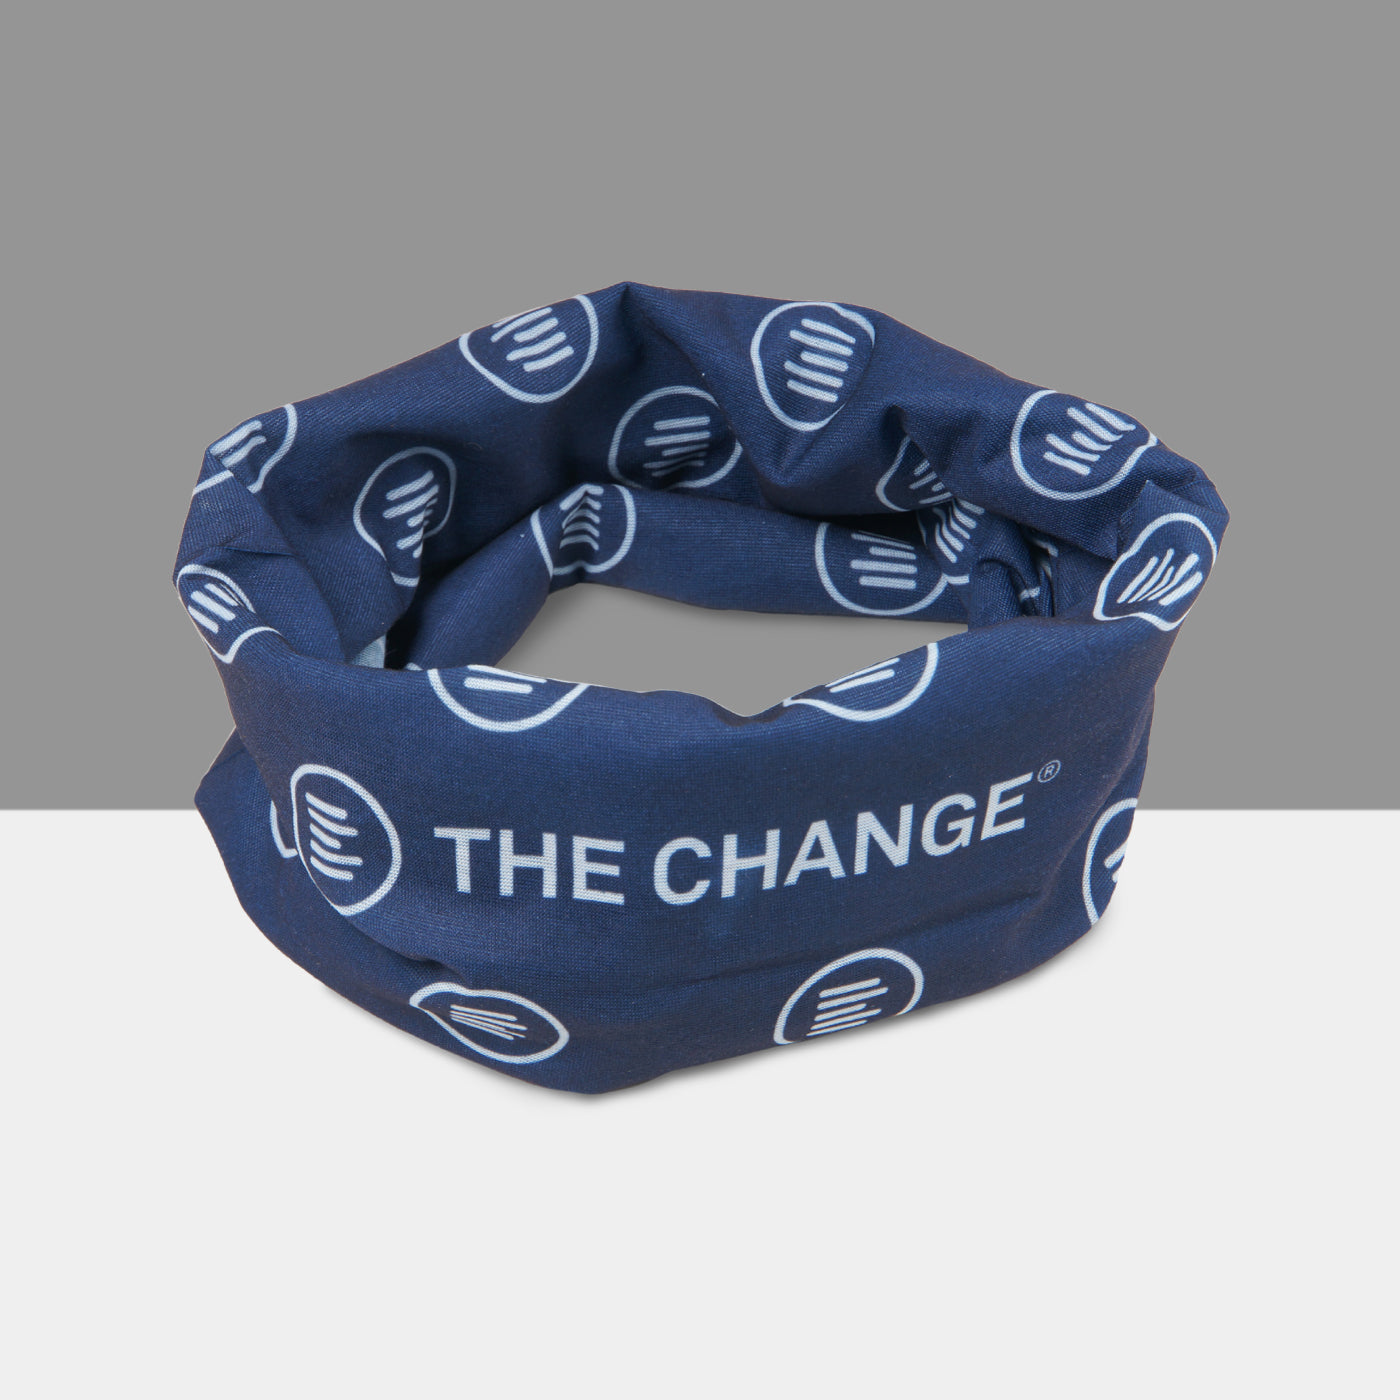 Tube scarf from BE THE CHANGE